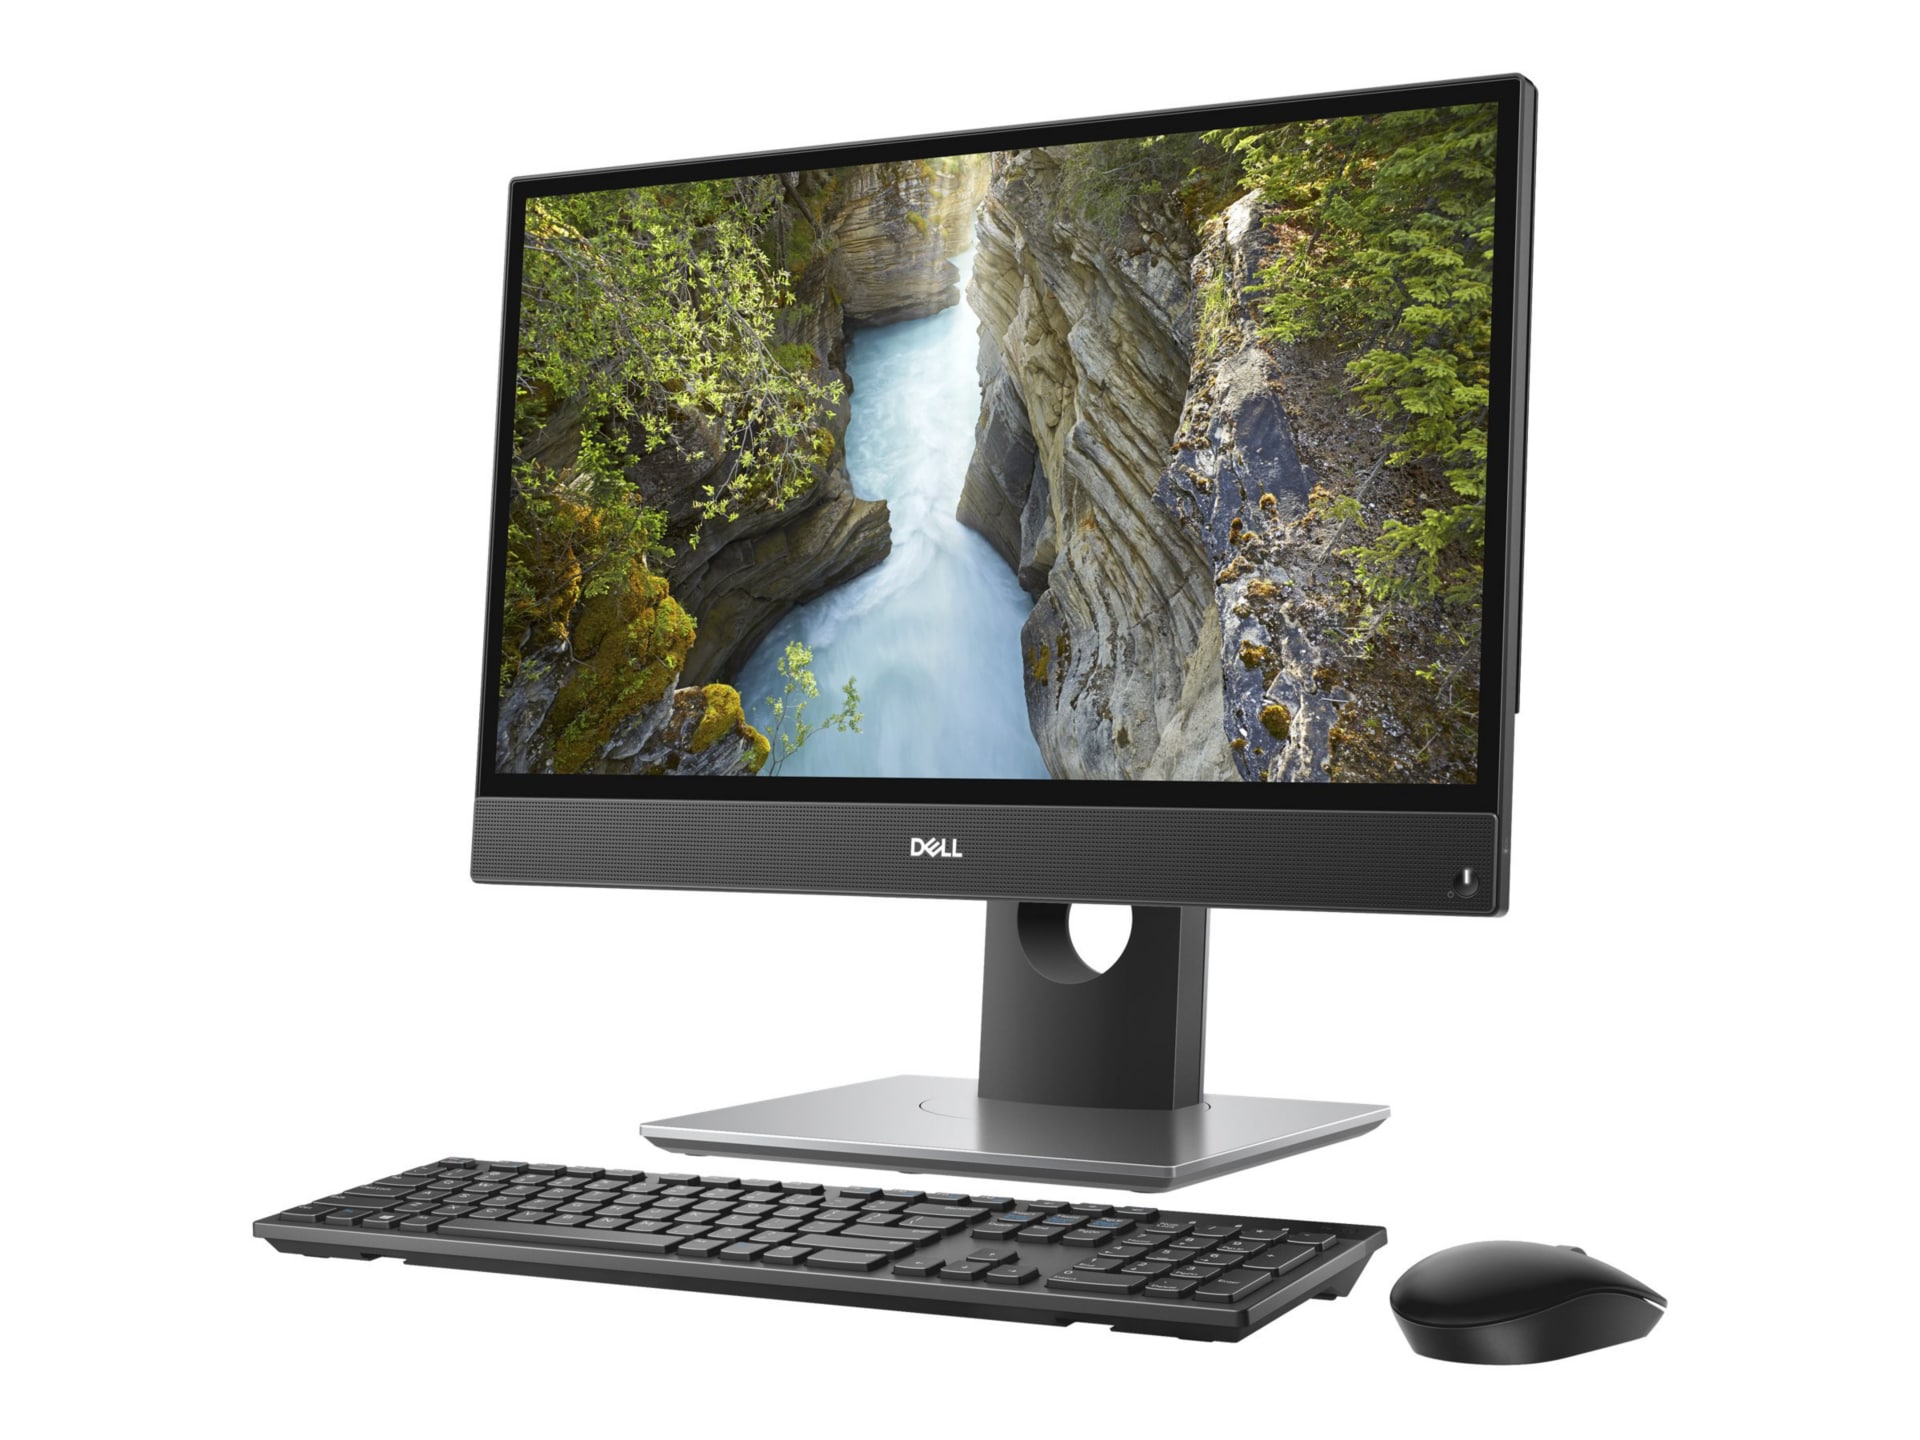 All-in-one computer vs desktop PC: which is right for you?